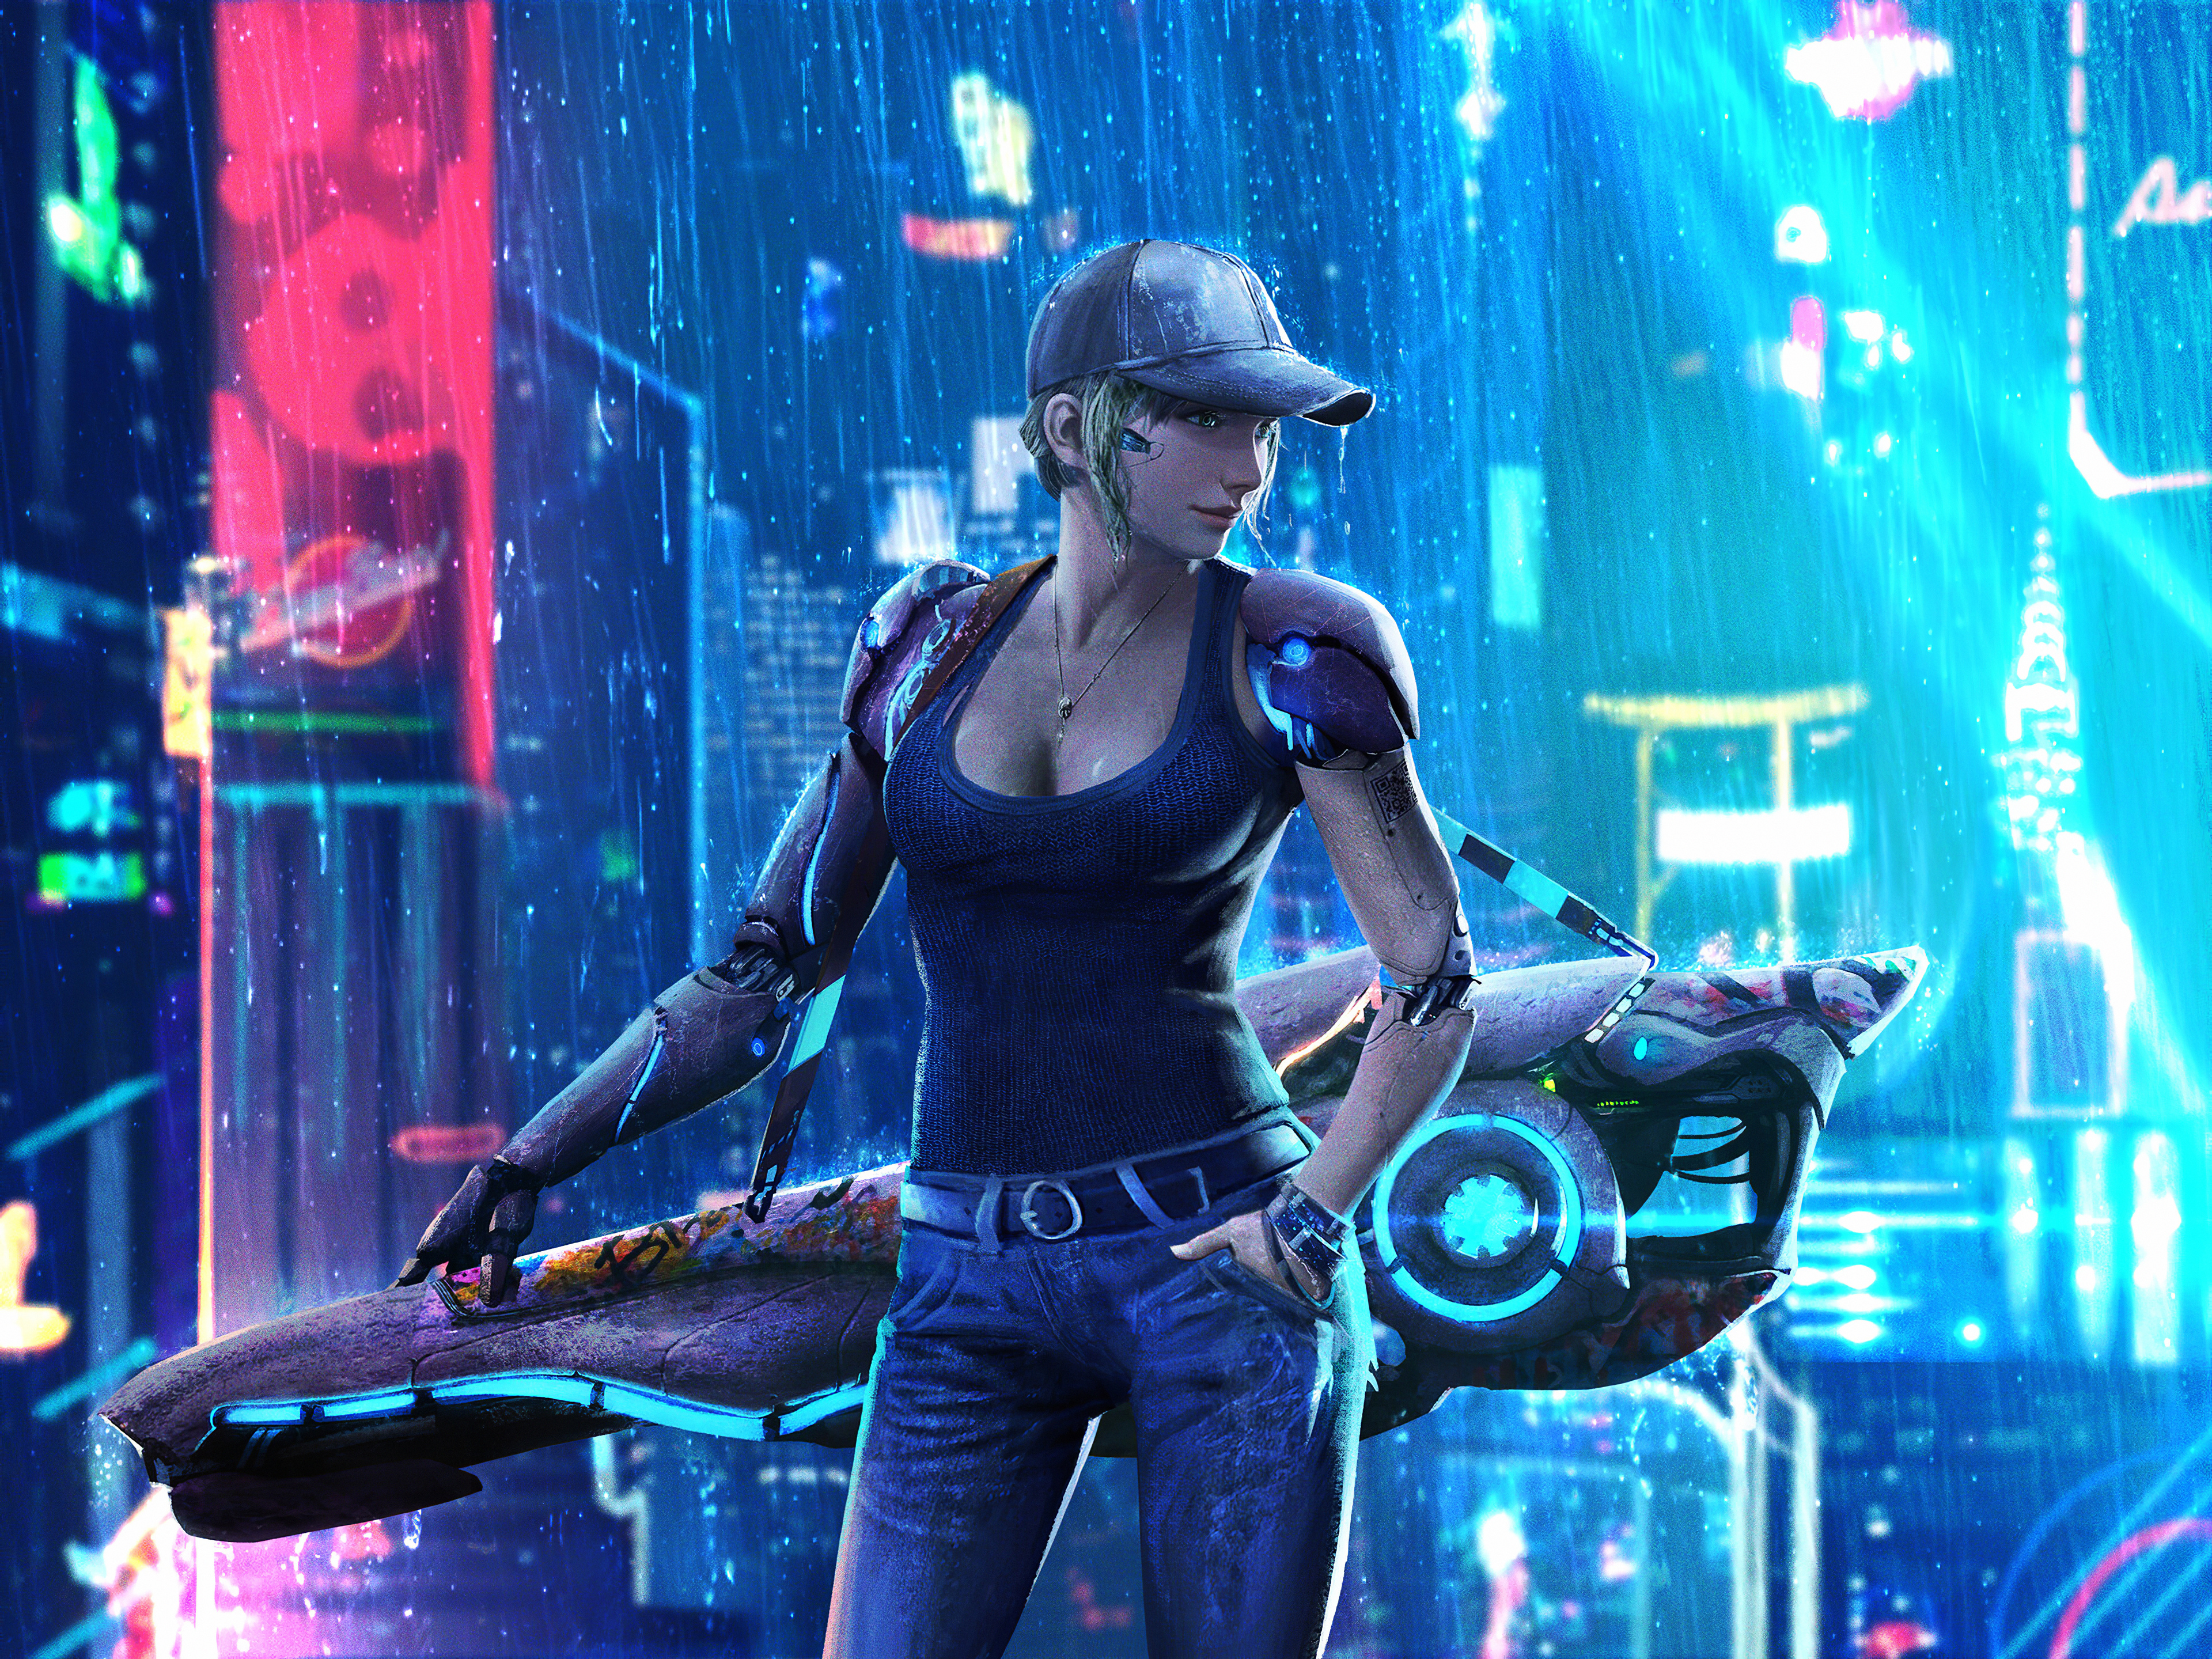 Cybergirl City Bike, HD Artist, 4k Wallpaper, Image, Background, Photo and Picture